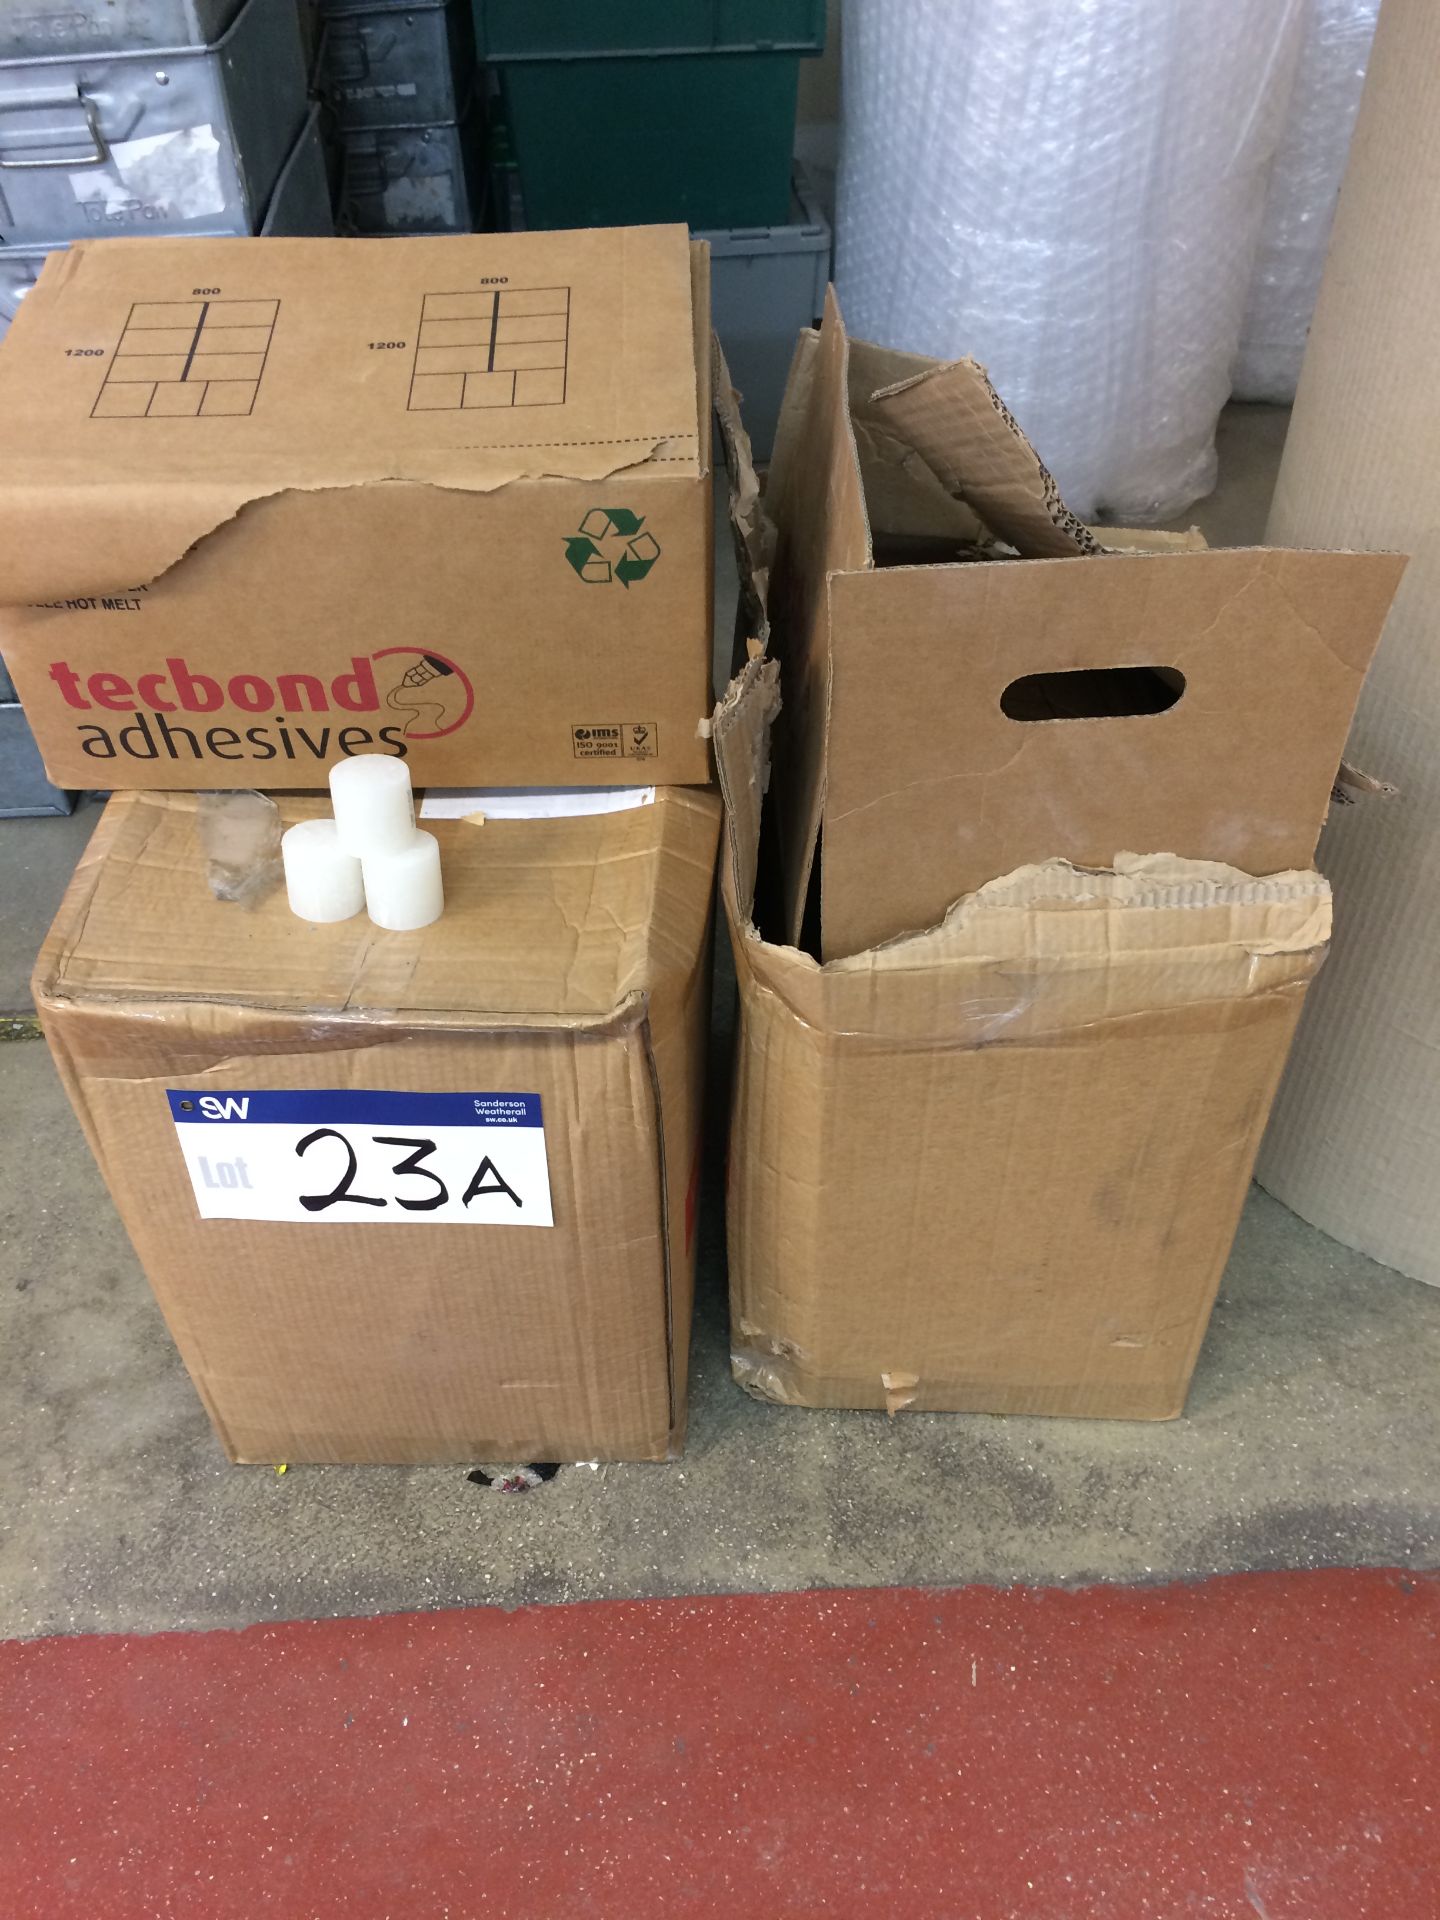 Quantity of Techbond Adhesives Hot Melt Adhesive in 3 boxes